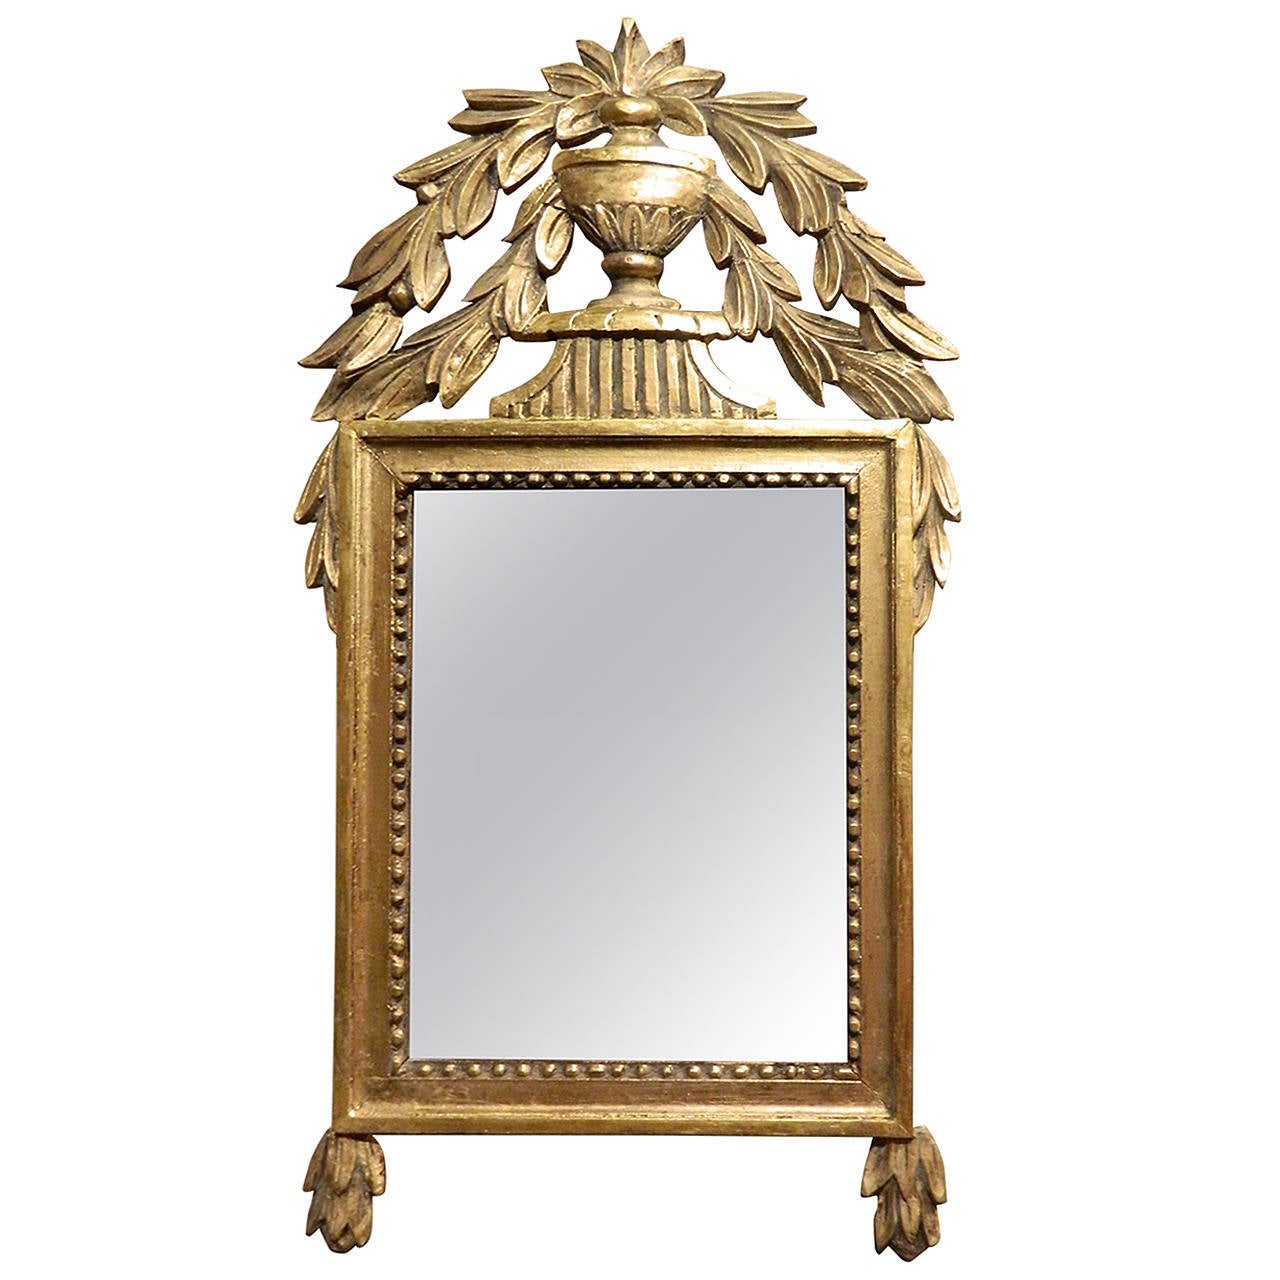 French Gilded, Painted, Carved and Crested Wood Mirror, 19th Century For Sale at 1stdibs